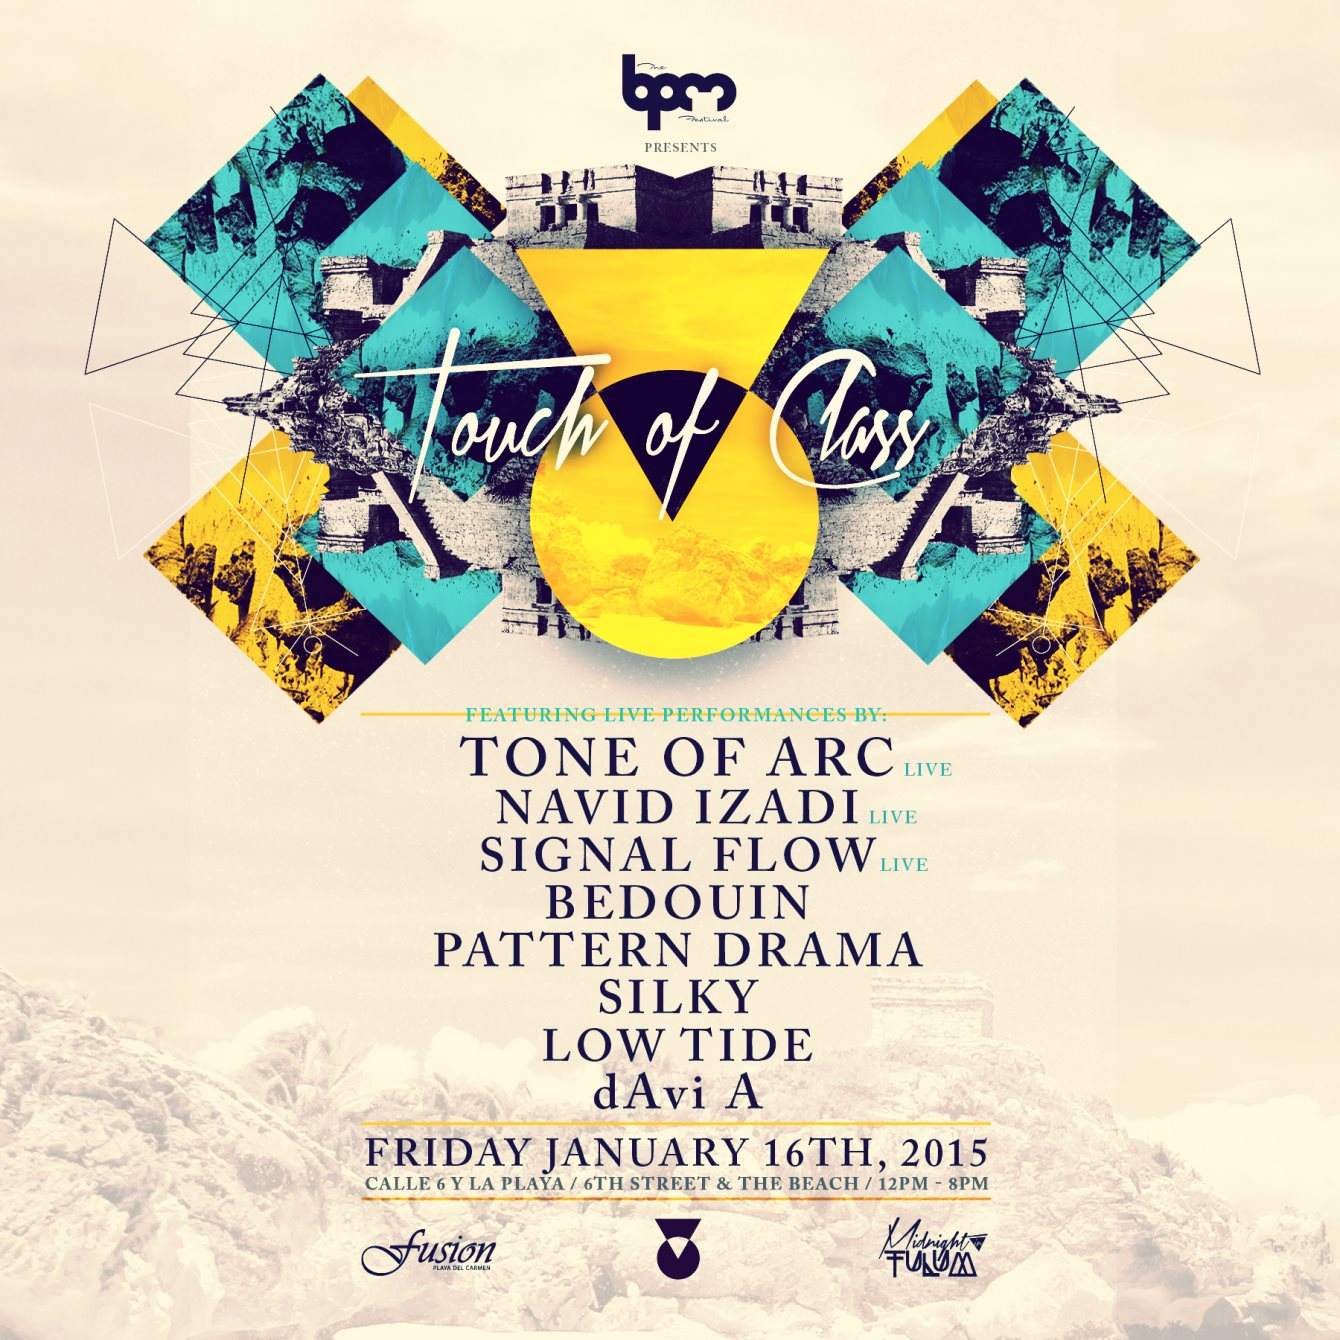 The BPM Festival: Touch Of Class - フライヤー表